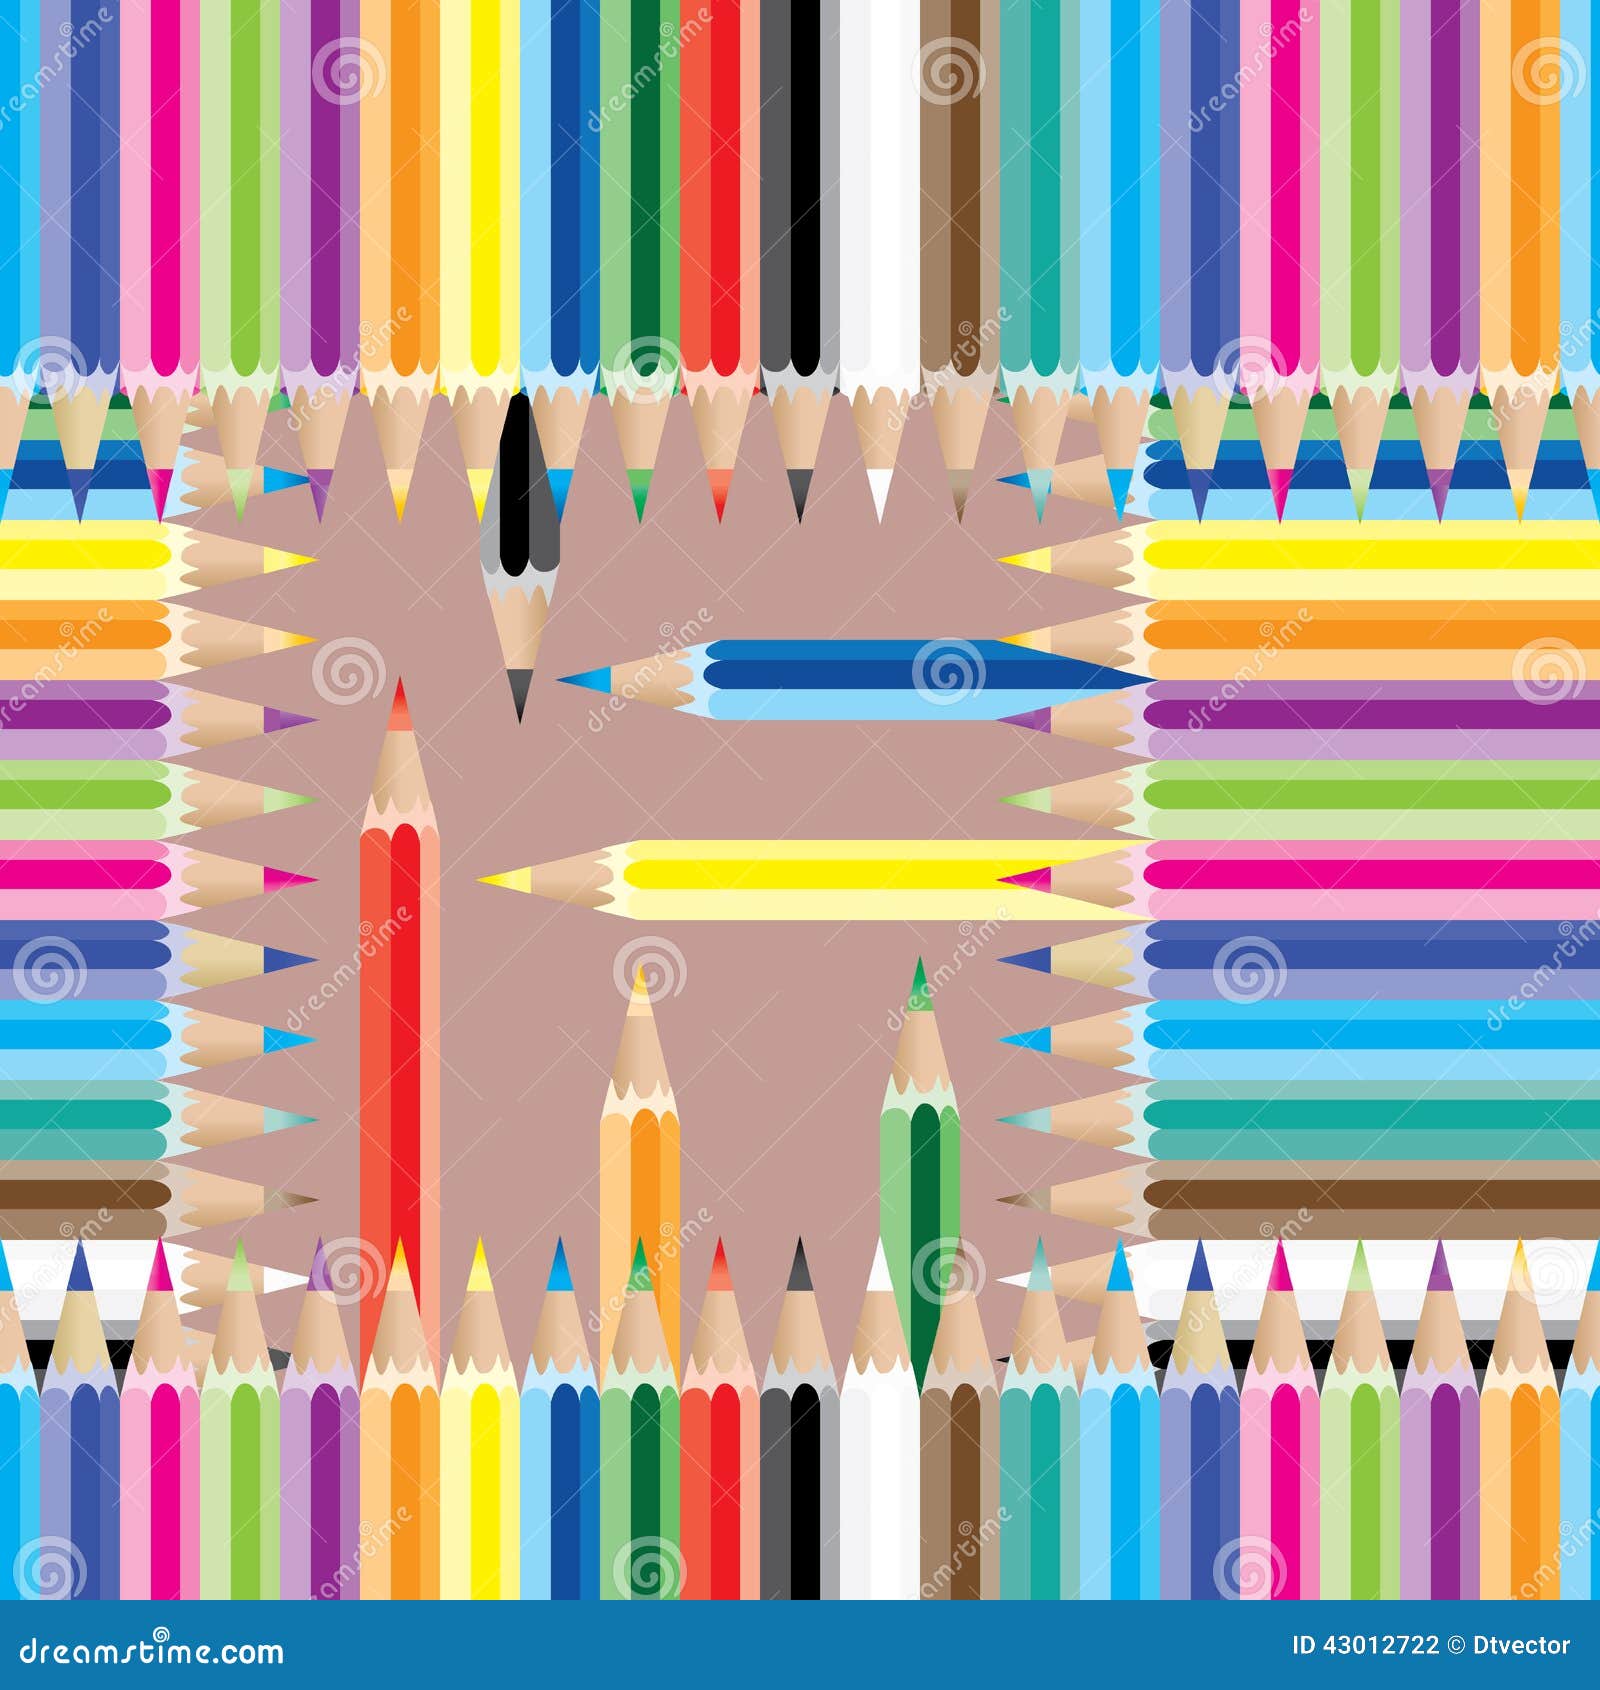 pencil colorful square seamless pattern